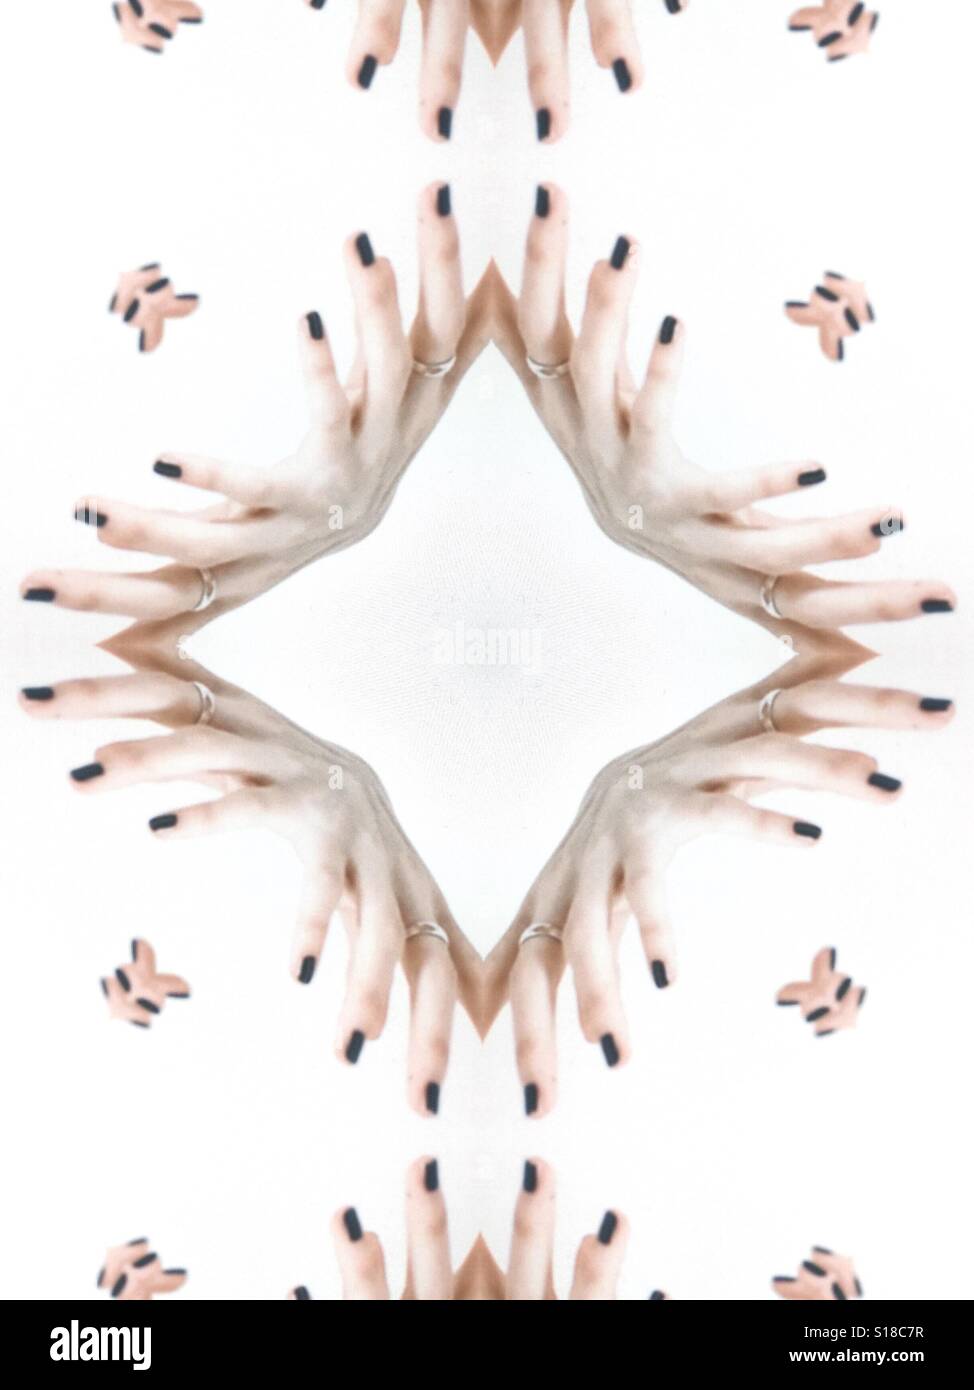 An abstract conceptual image of a repetitive design. Created from female fingers against a white background Stock Photo